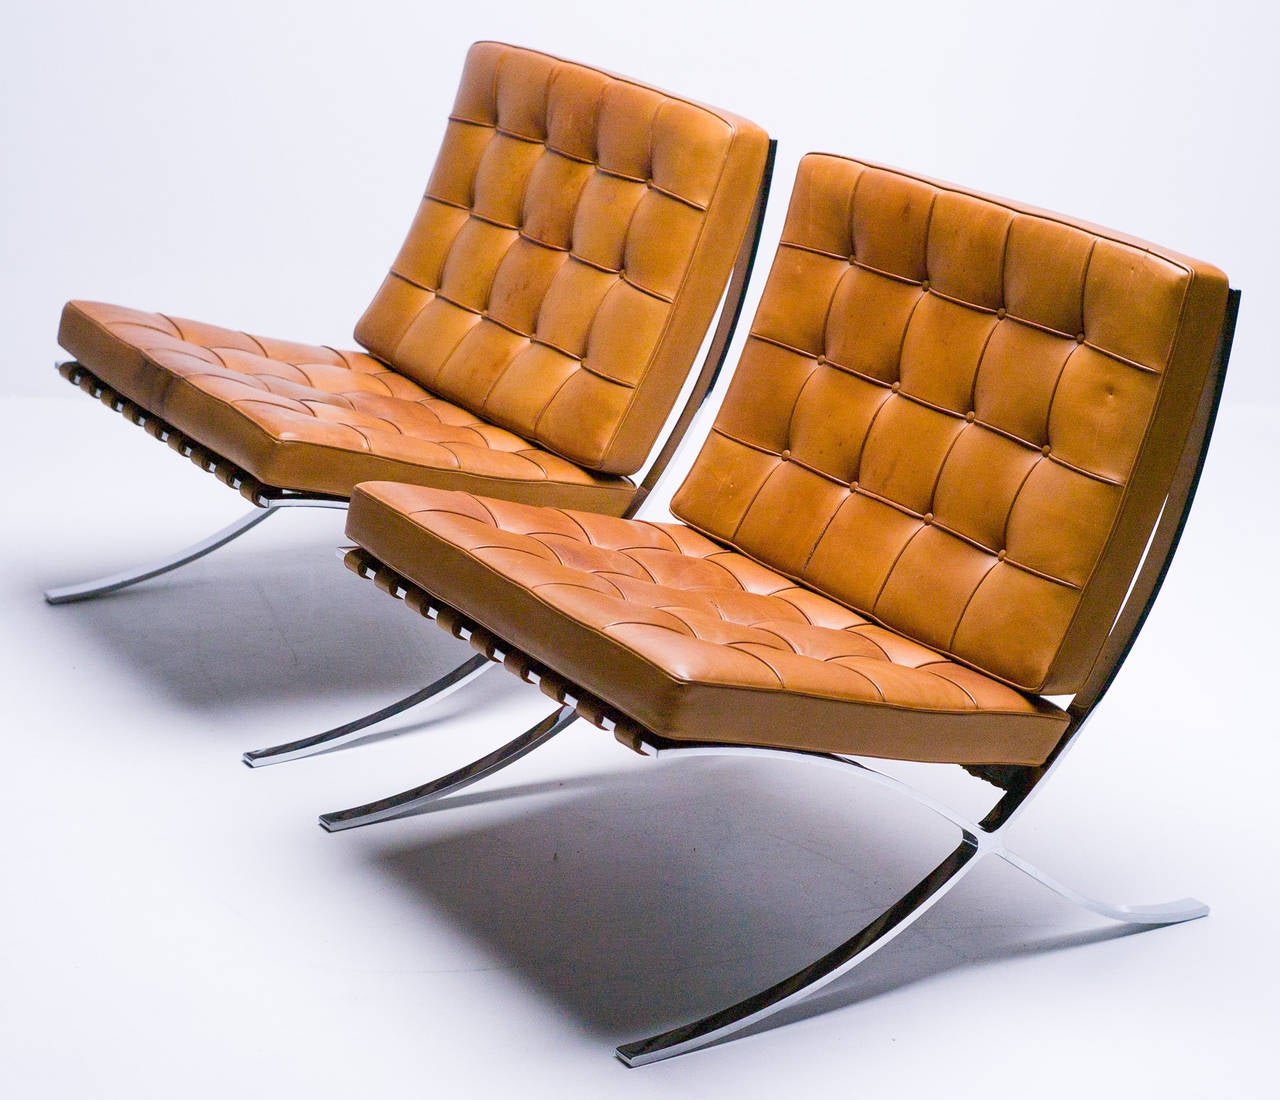 American Barcelona Chairs in Saddle leather by Mies van der Rohe for Knoll International